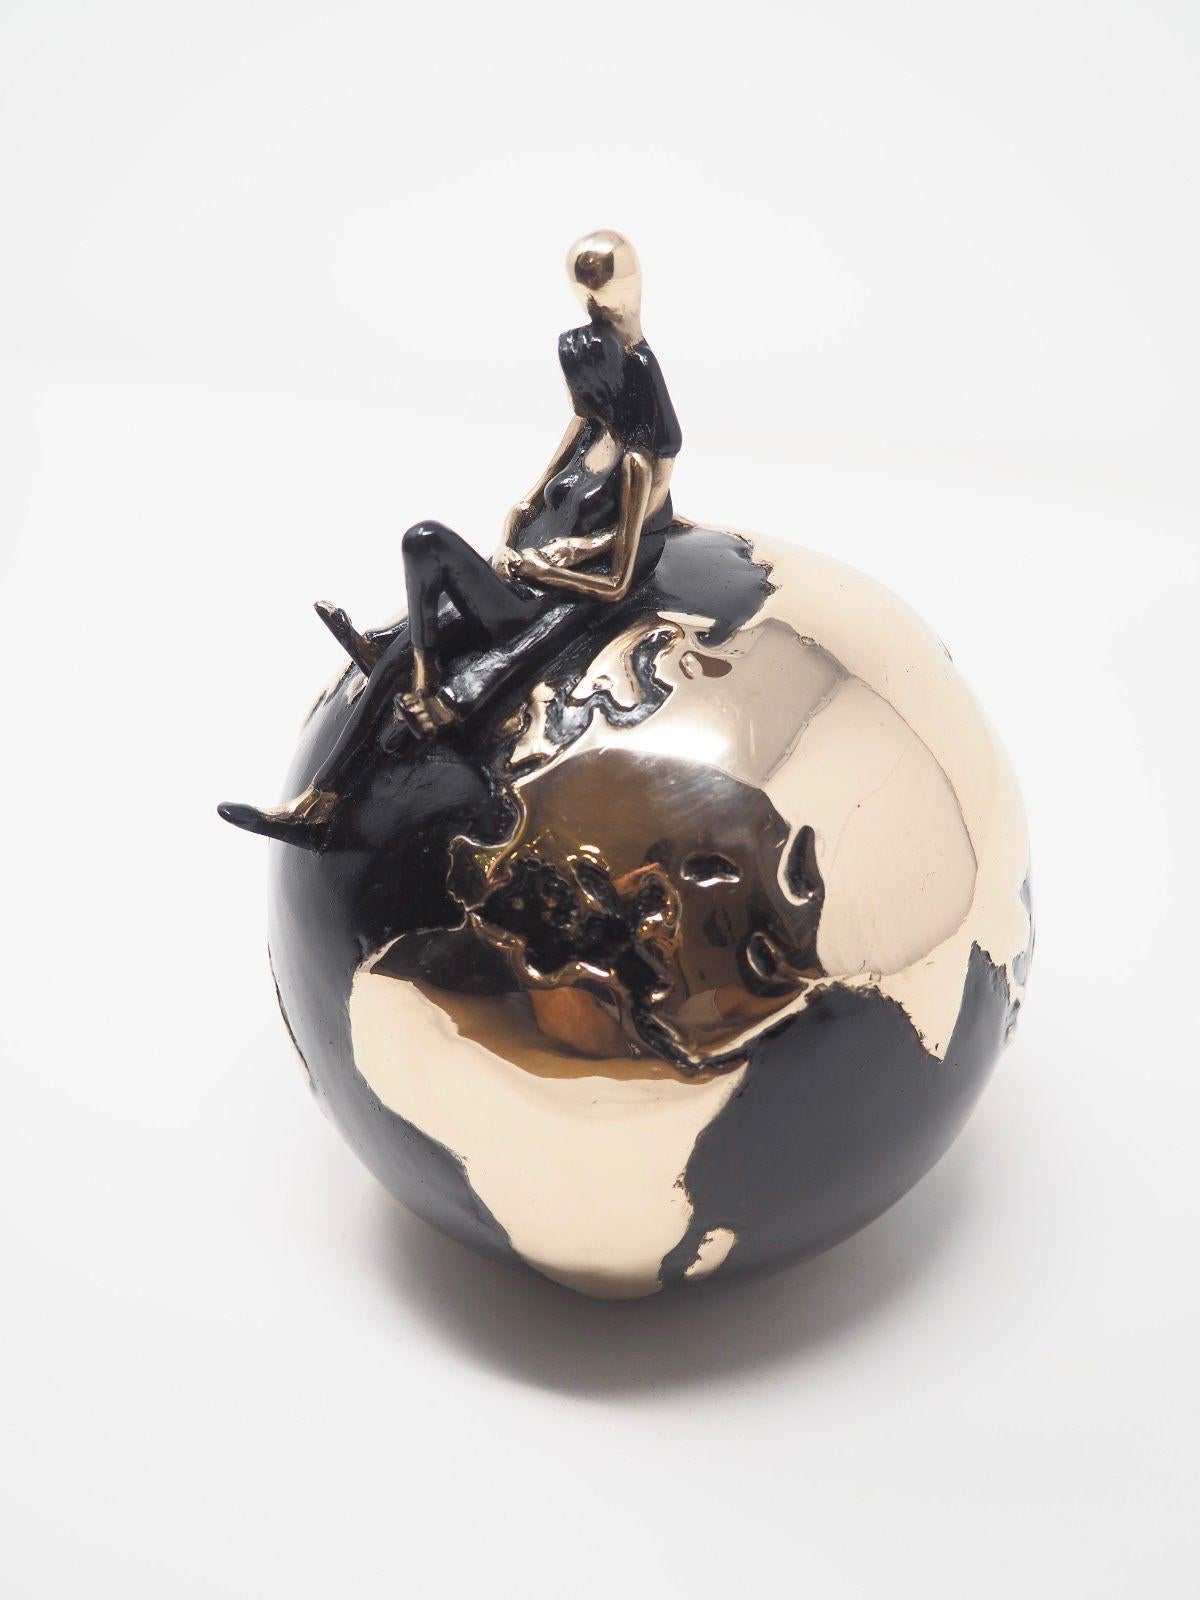 Love her Madly- Standby your loved one, enjoy the time being together. This Gold edition of Mireia is made of bronze with black patina (the ocean) and polished bronze that gives the shiny gold appearance (the continents).  Edition Size: 8 + 4 Artist